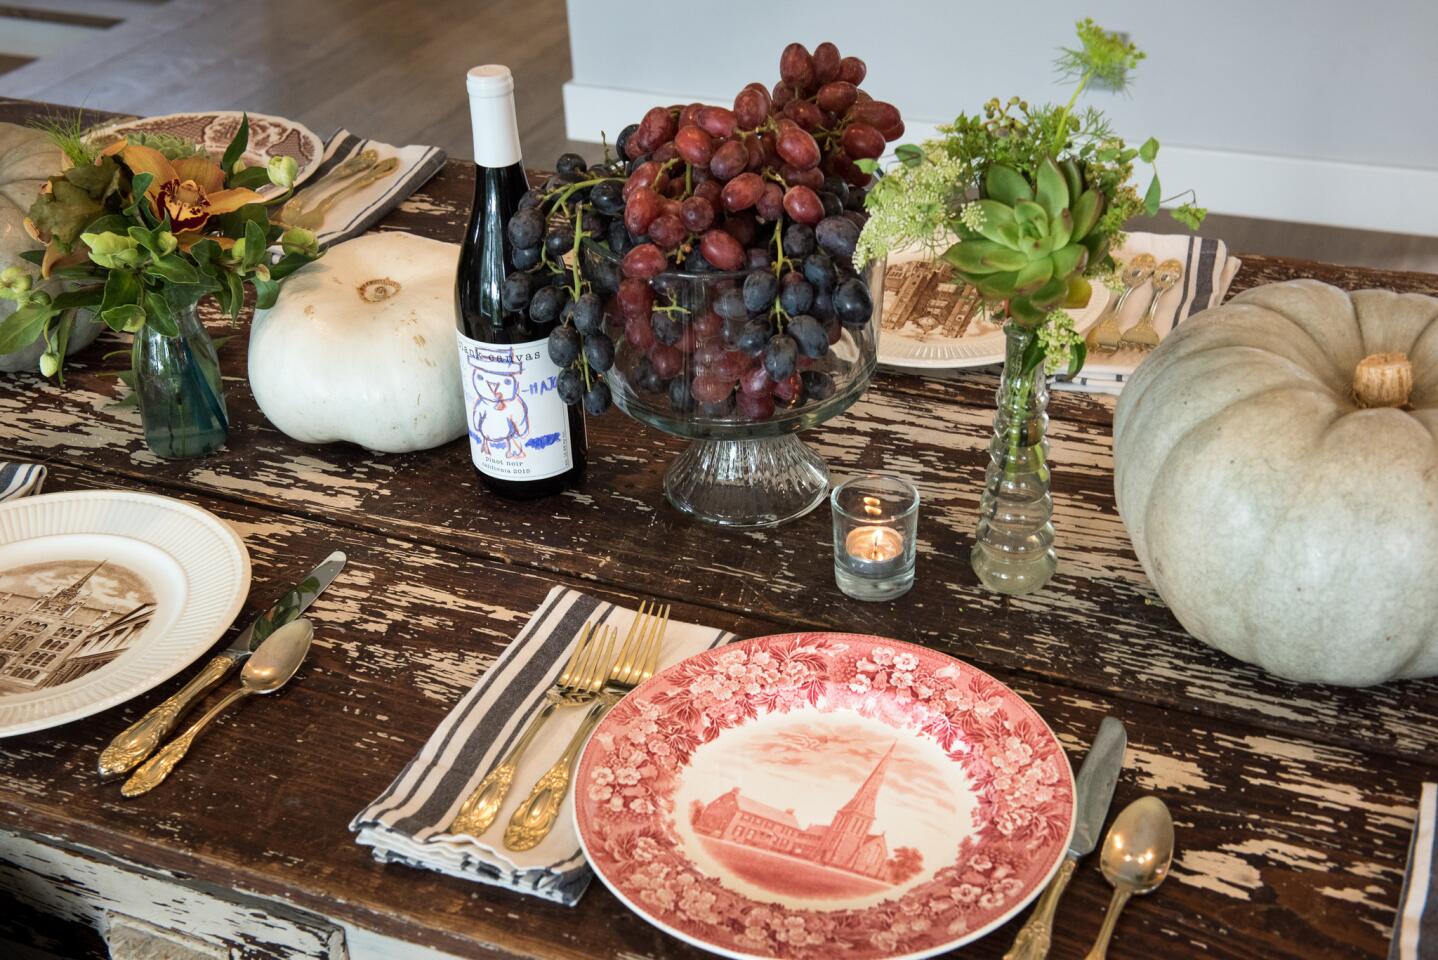 Thanksgiving tablescaping in the home of Robert and Cortney Novogratz.